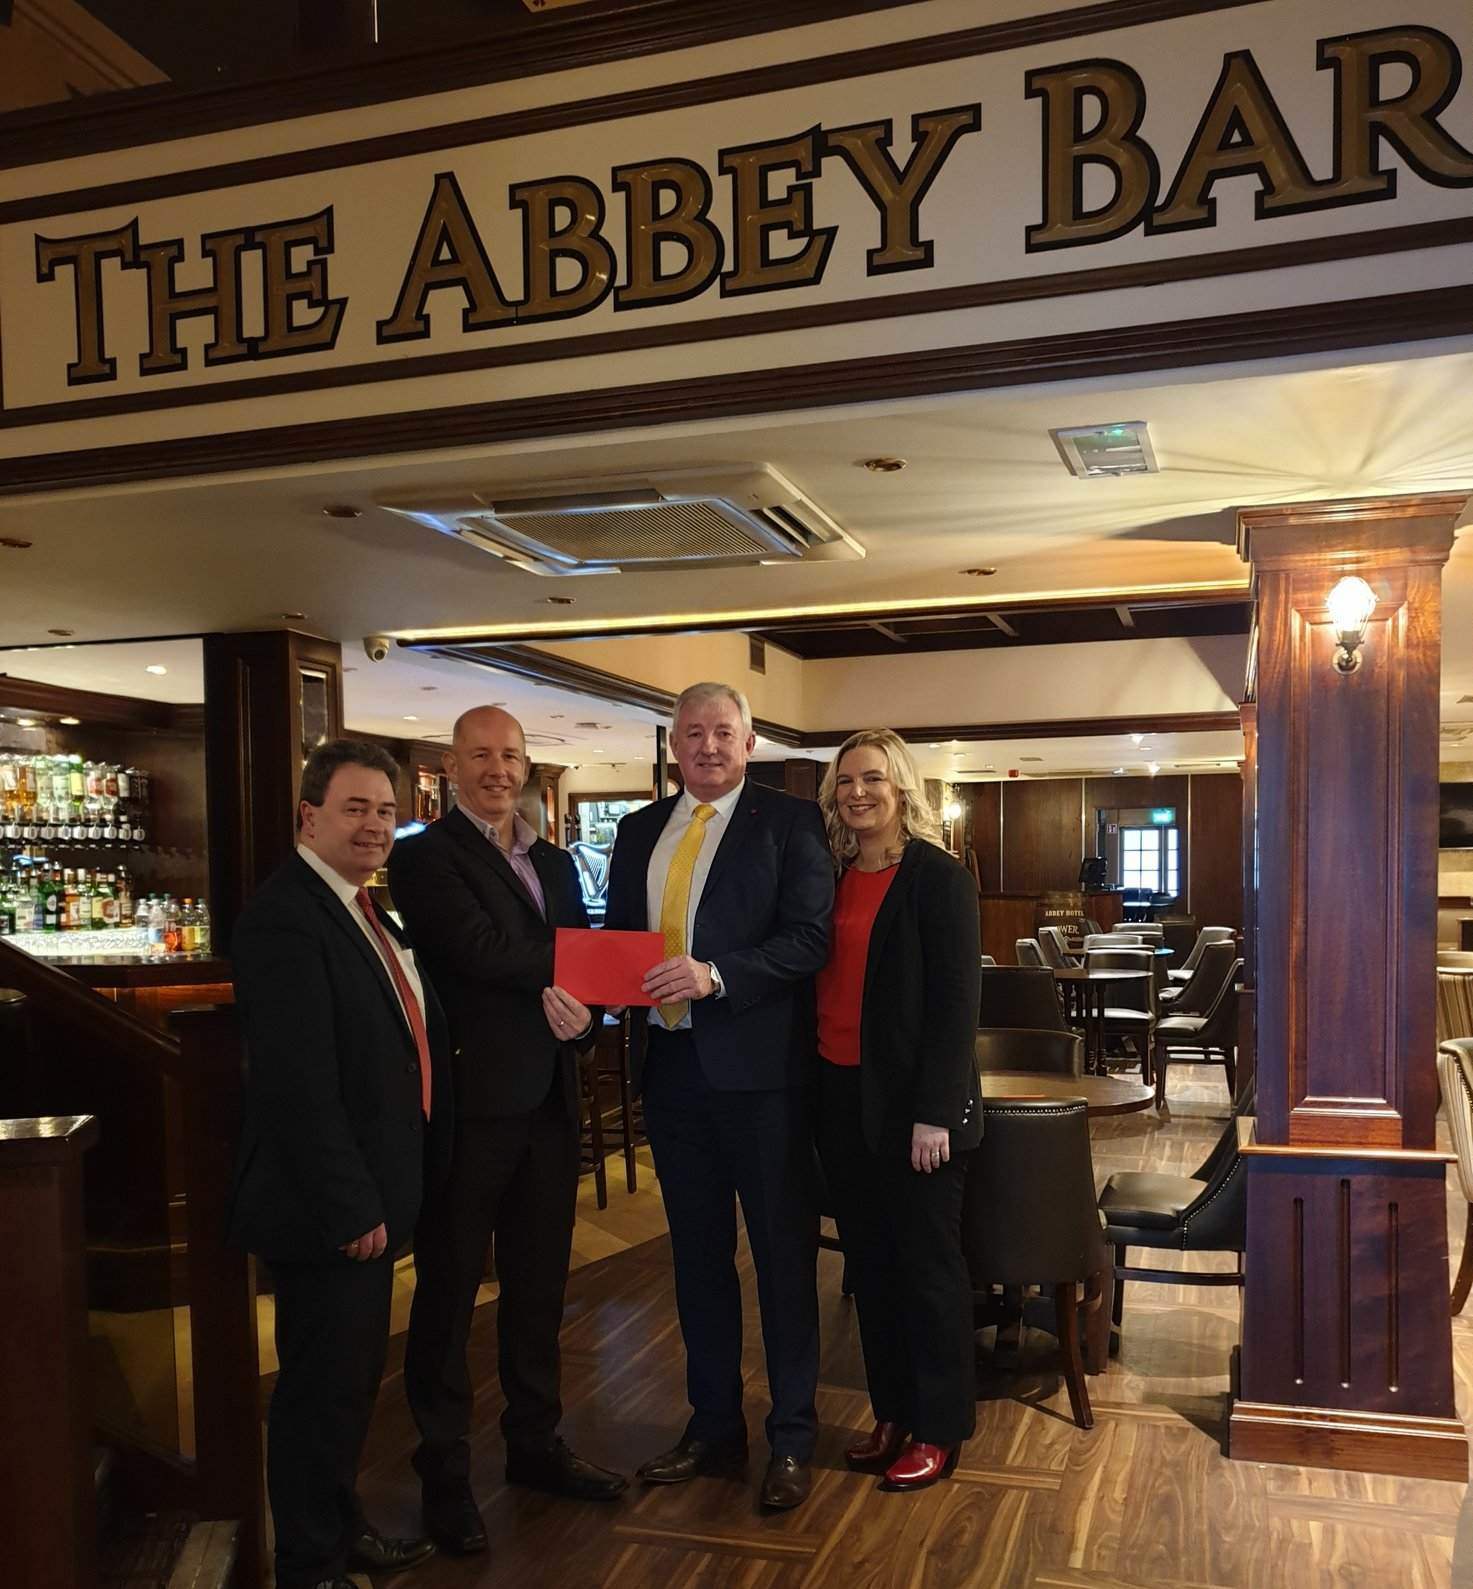 From left: Presenting the prize is Coca-Cola HBC’s Stephen King with the Abbey Hotel’s General Manager Danny O’Donnell alongside his valued team members Marketing Manager Elaine McInaw and Bar Manager Andrew Quinn.